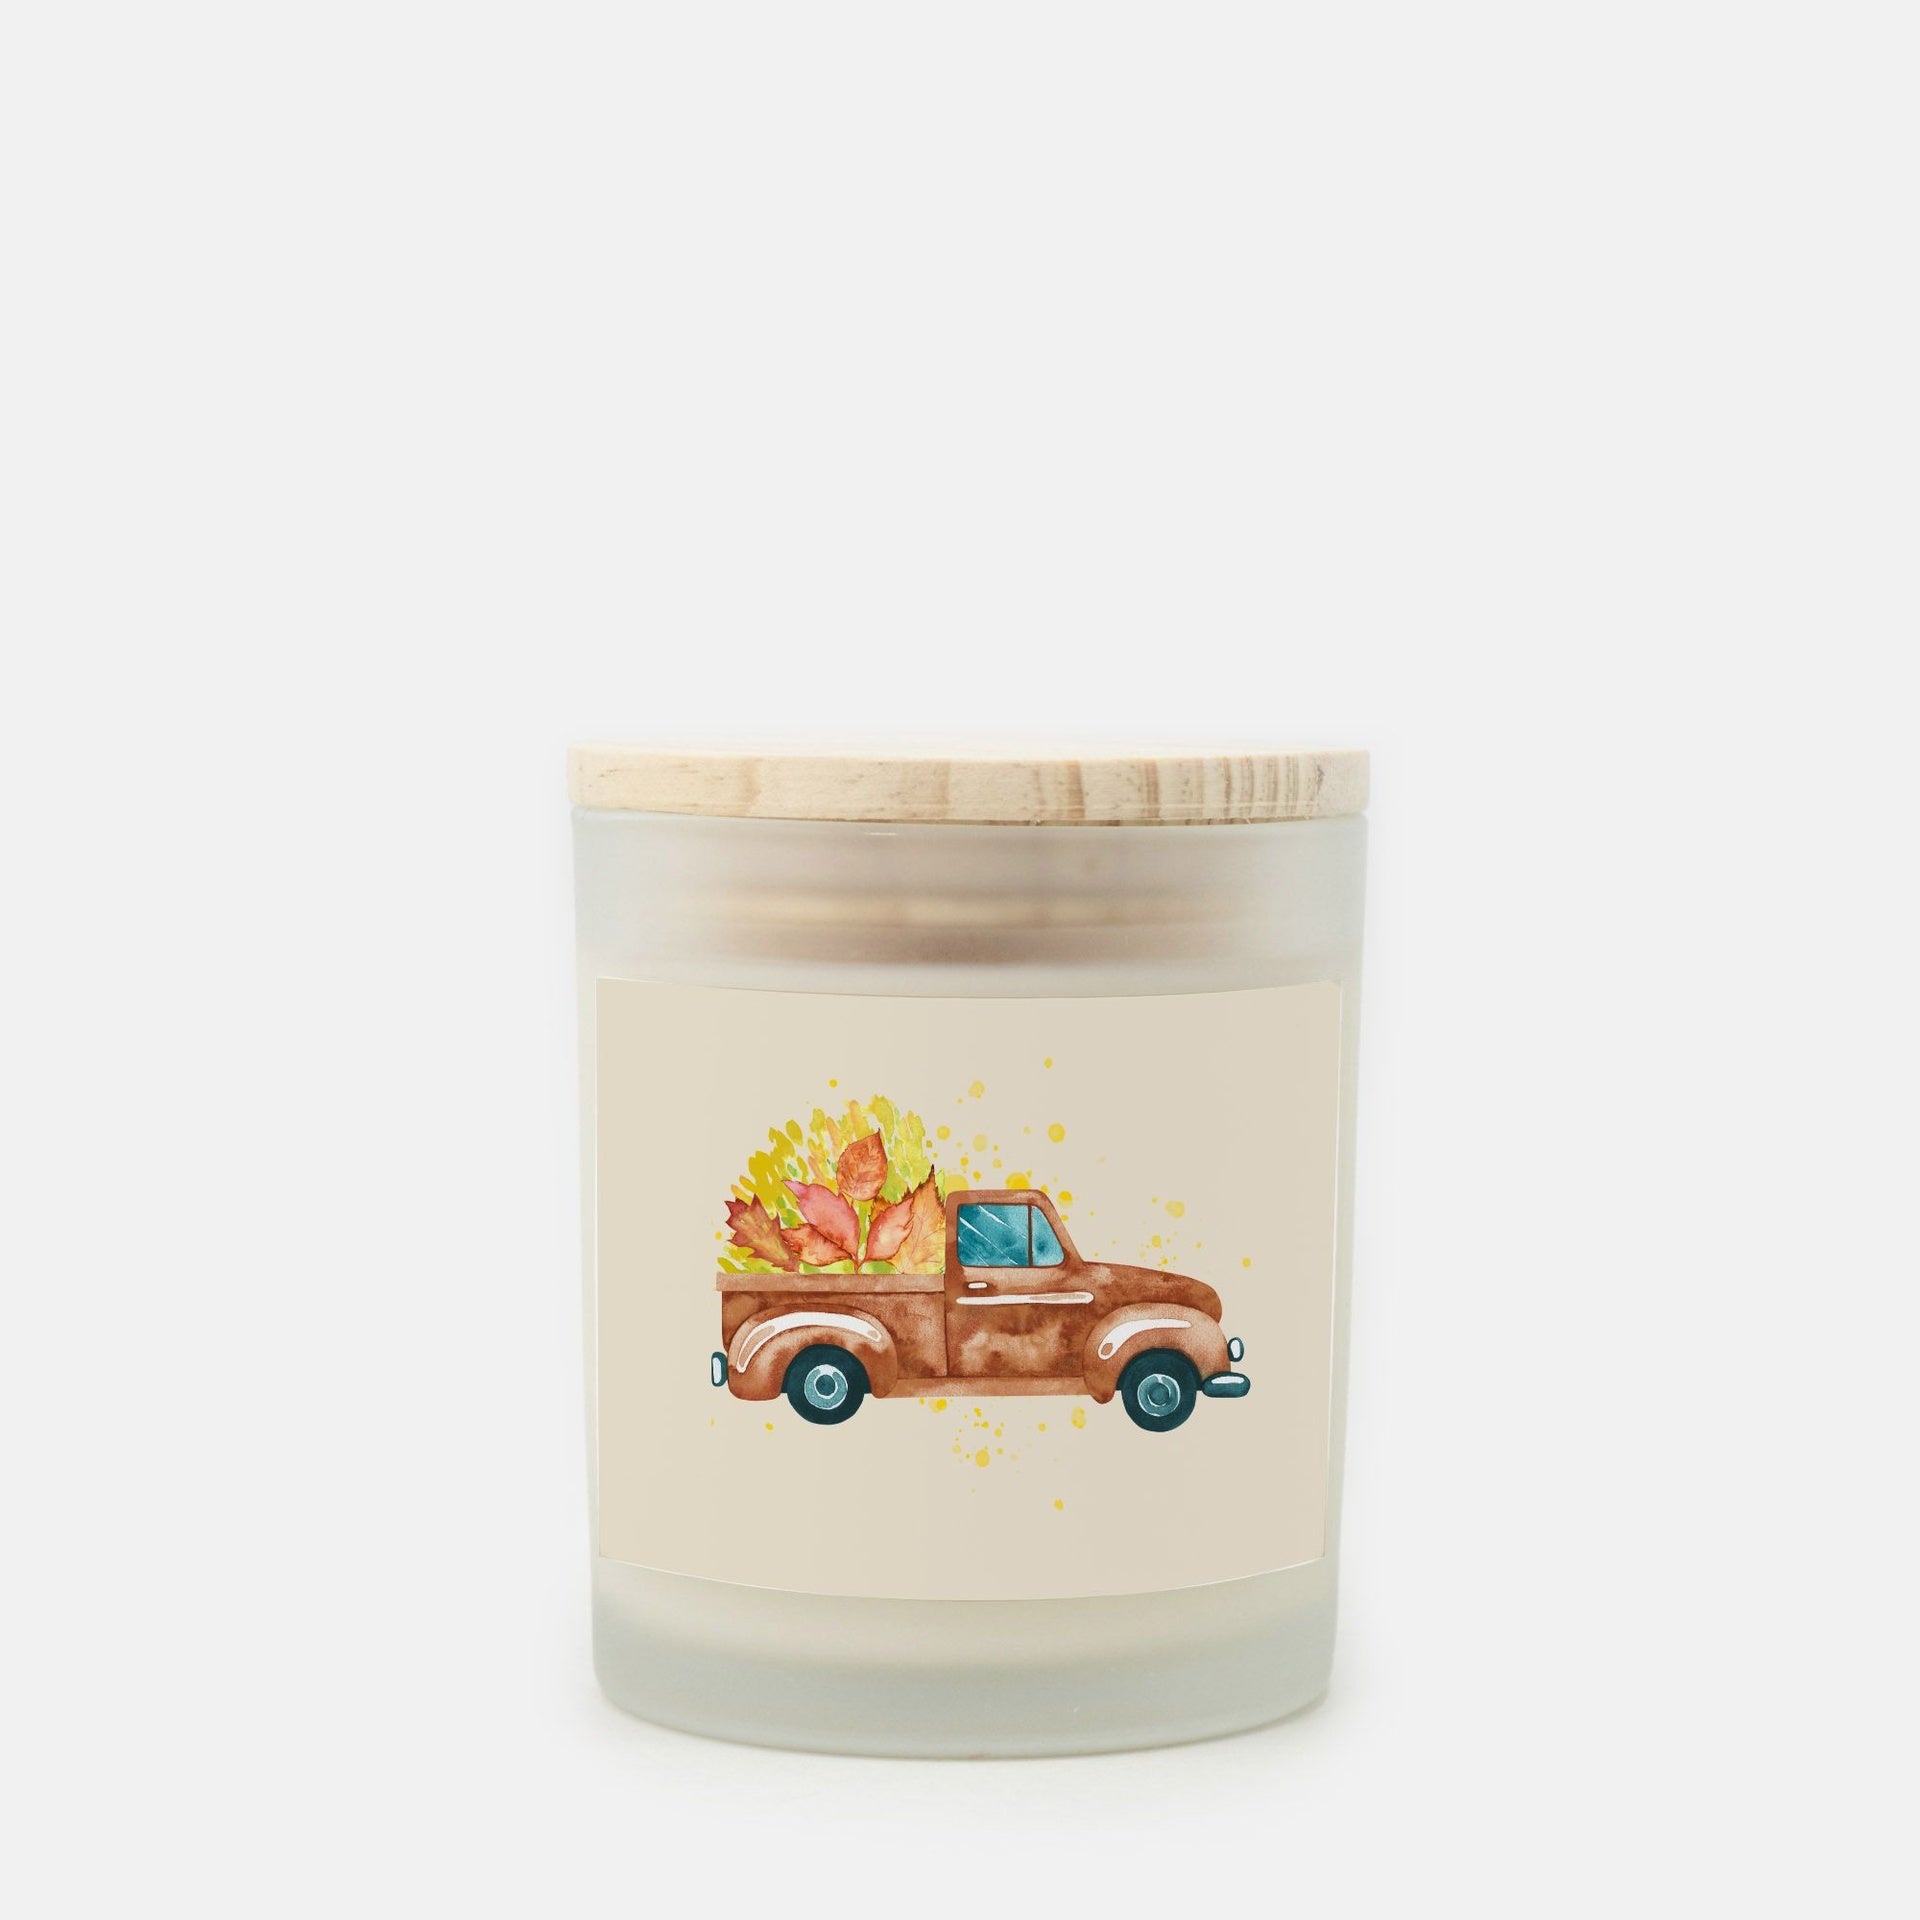 Lifestyle Details - 11oz Brown Rustic Truck & Leaves Frosted Glass Candle - Cashmere Vanilla